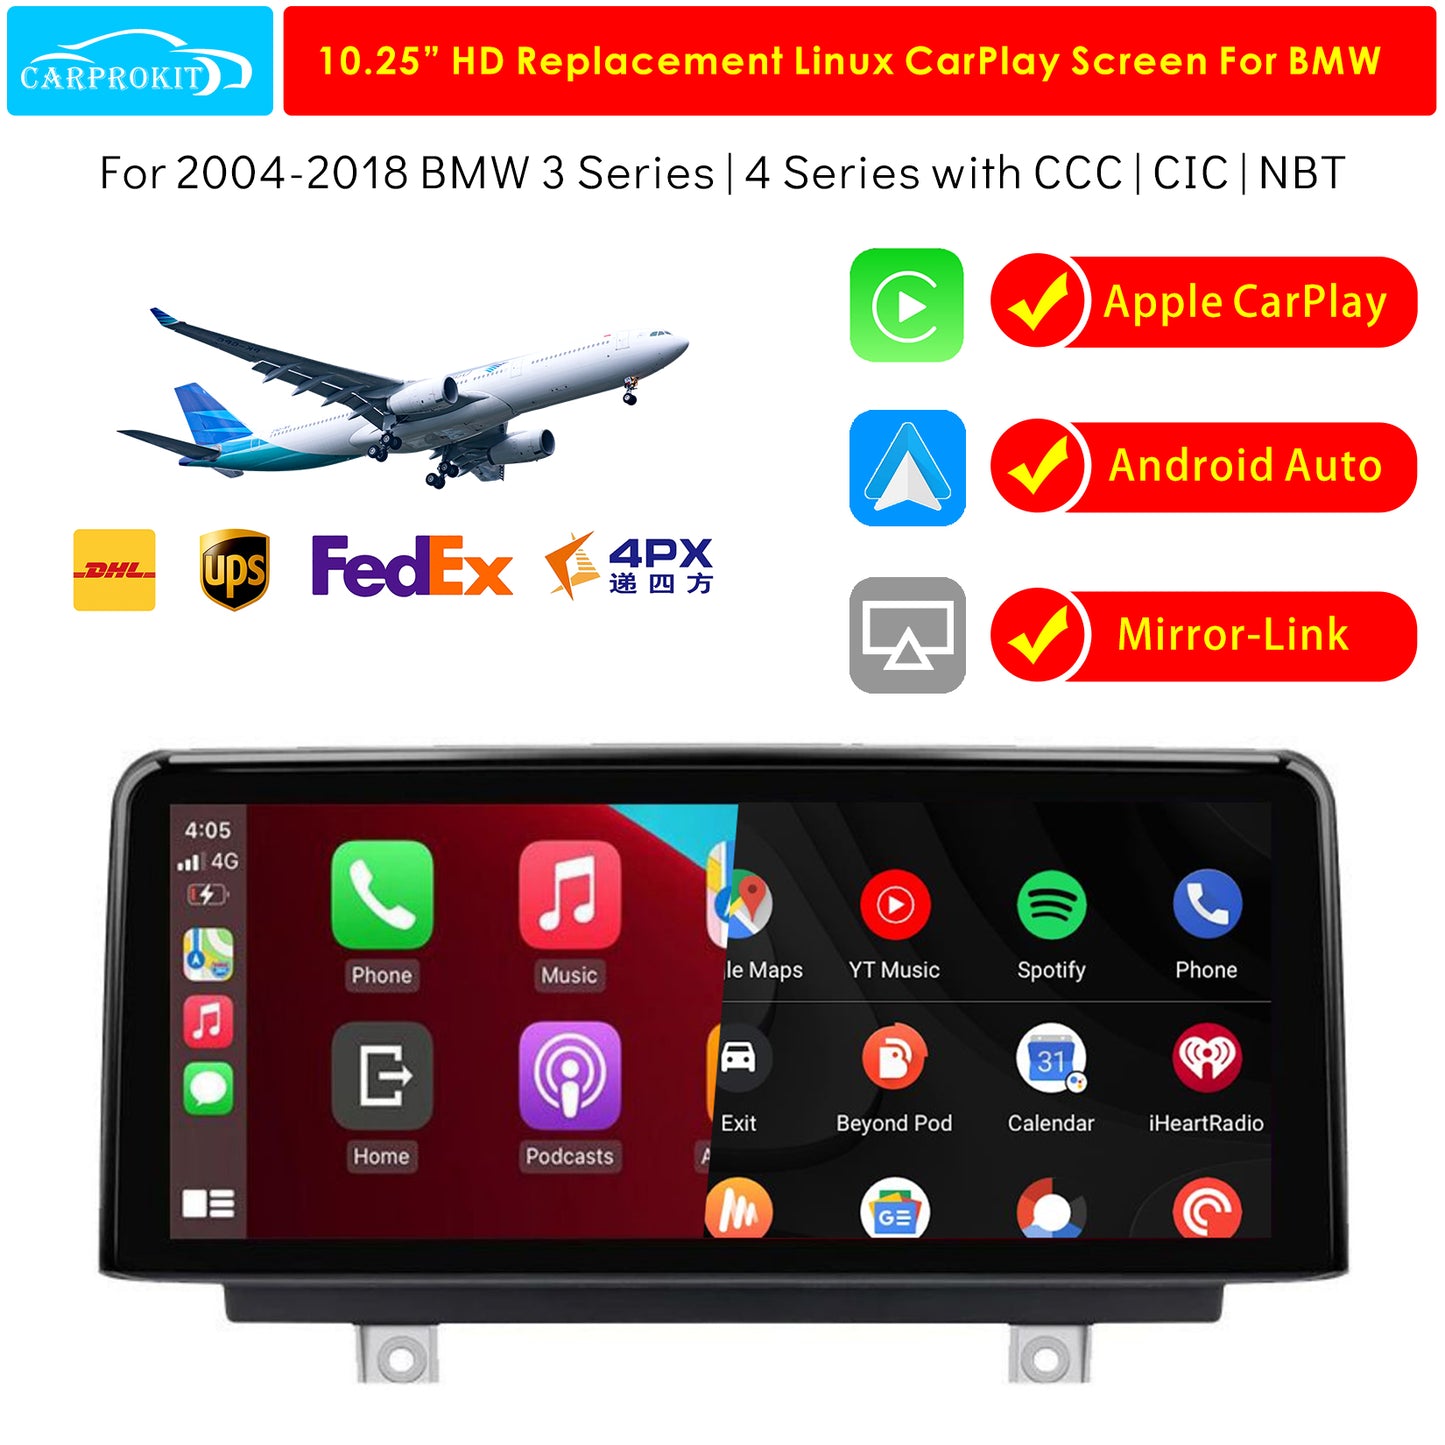 CarProKit Wireless CarPlay Android Auto Mirror-Link 10.25" Linux Replacement Touch Screen Kit for 2004-2018 BMW 3/4 Series with CCC CIC NBT System